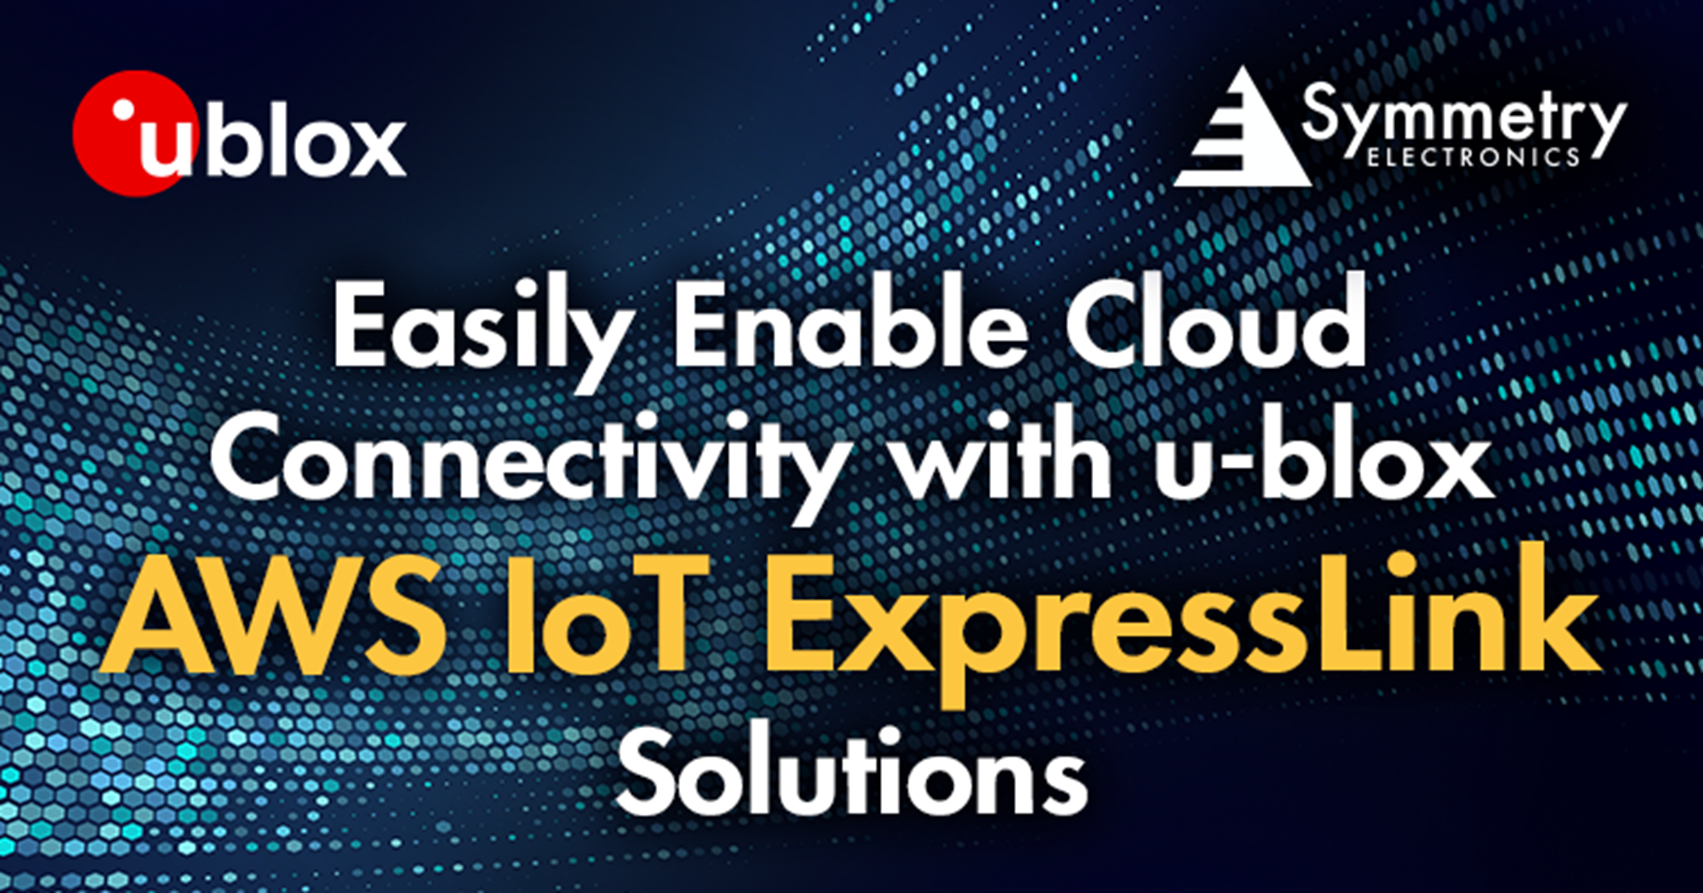 Easily enable cloud connectivity with AWS IoT ExpressLink Solutions from u-blox.